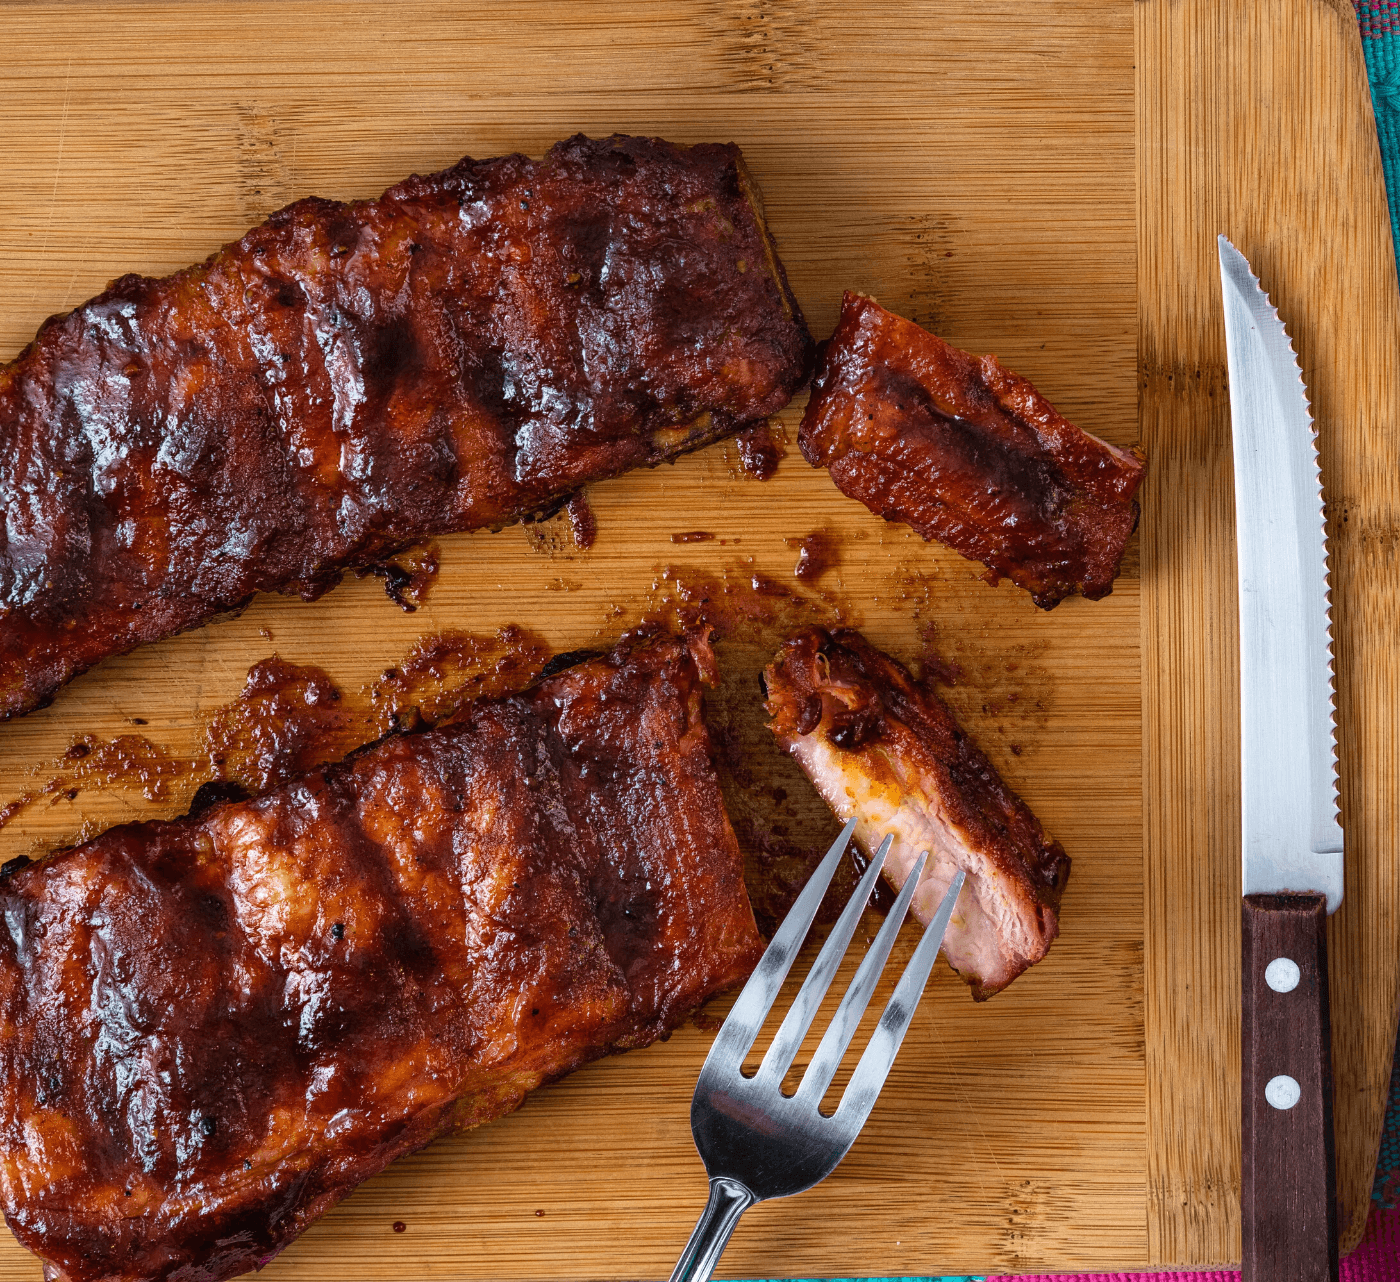 Candied pork ribs on a cutting board with knife and fork.